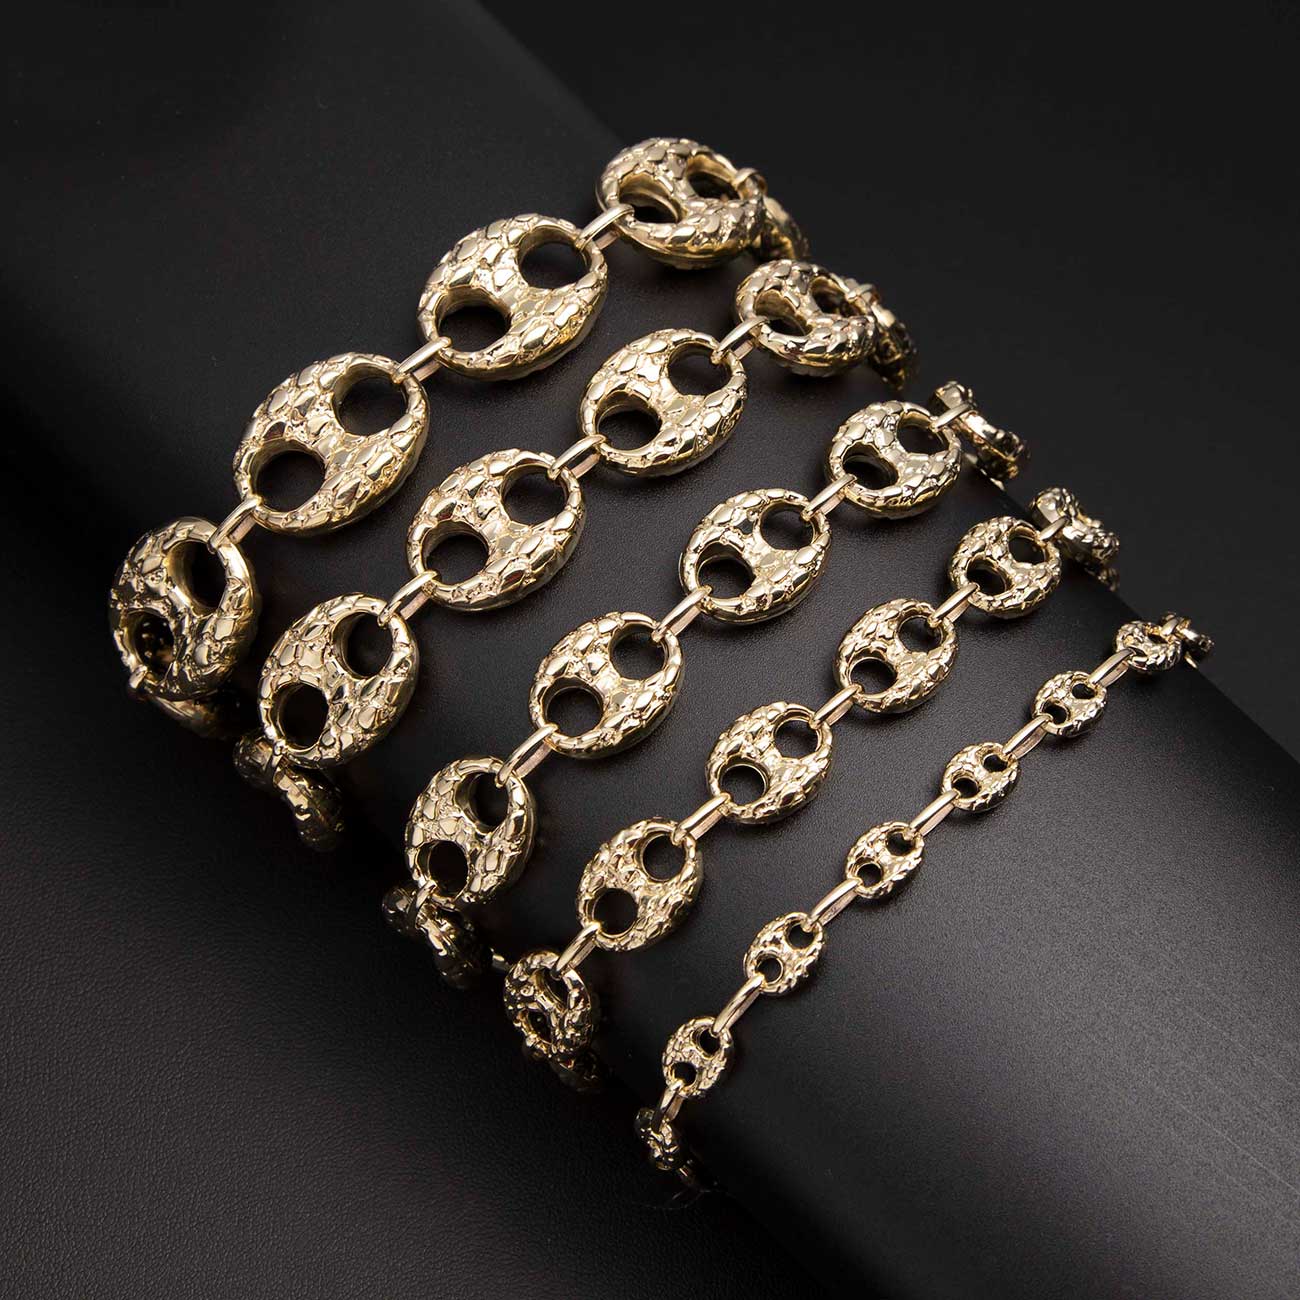 Nugget Puffed Gucci Link Chain Bracelet 10K Yellow Gold - Hollow